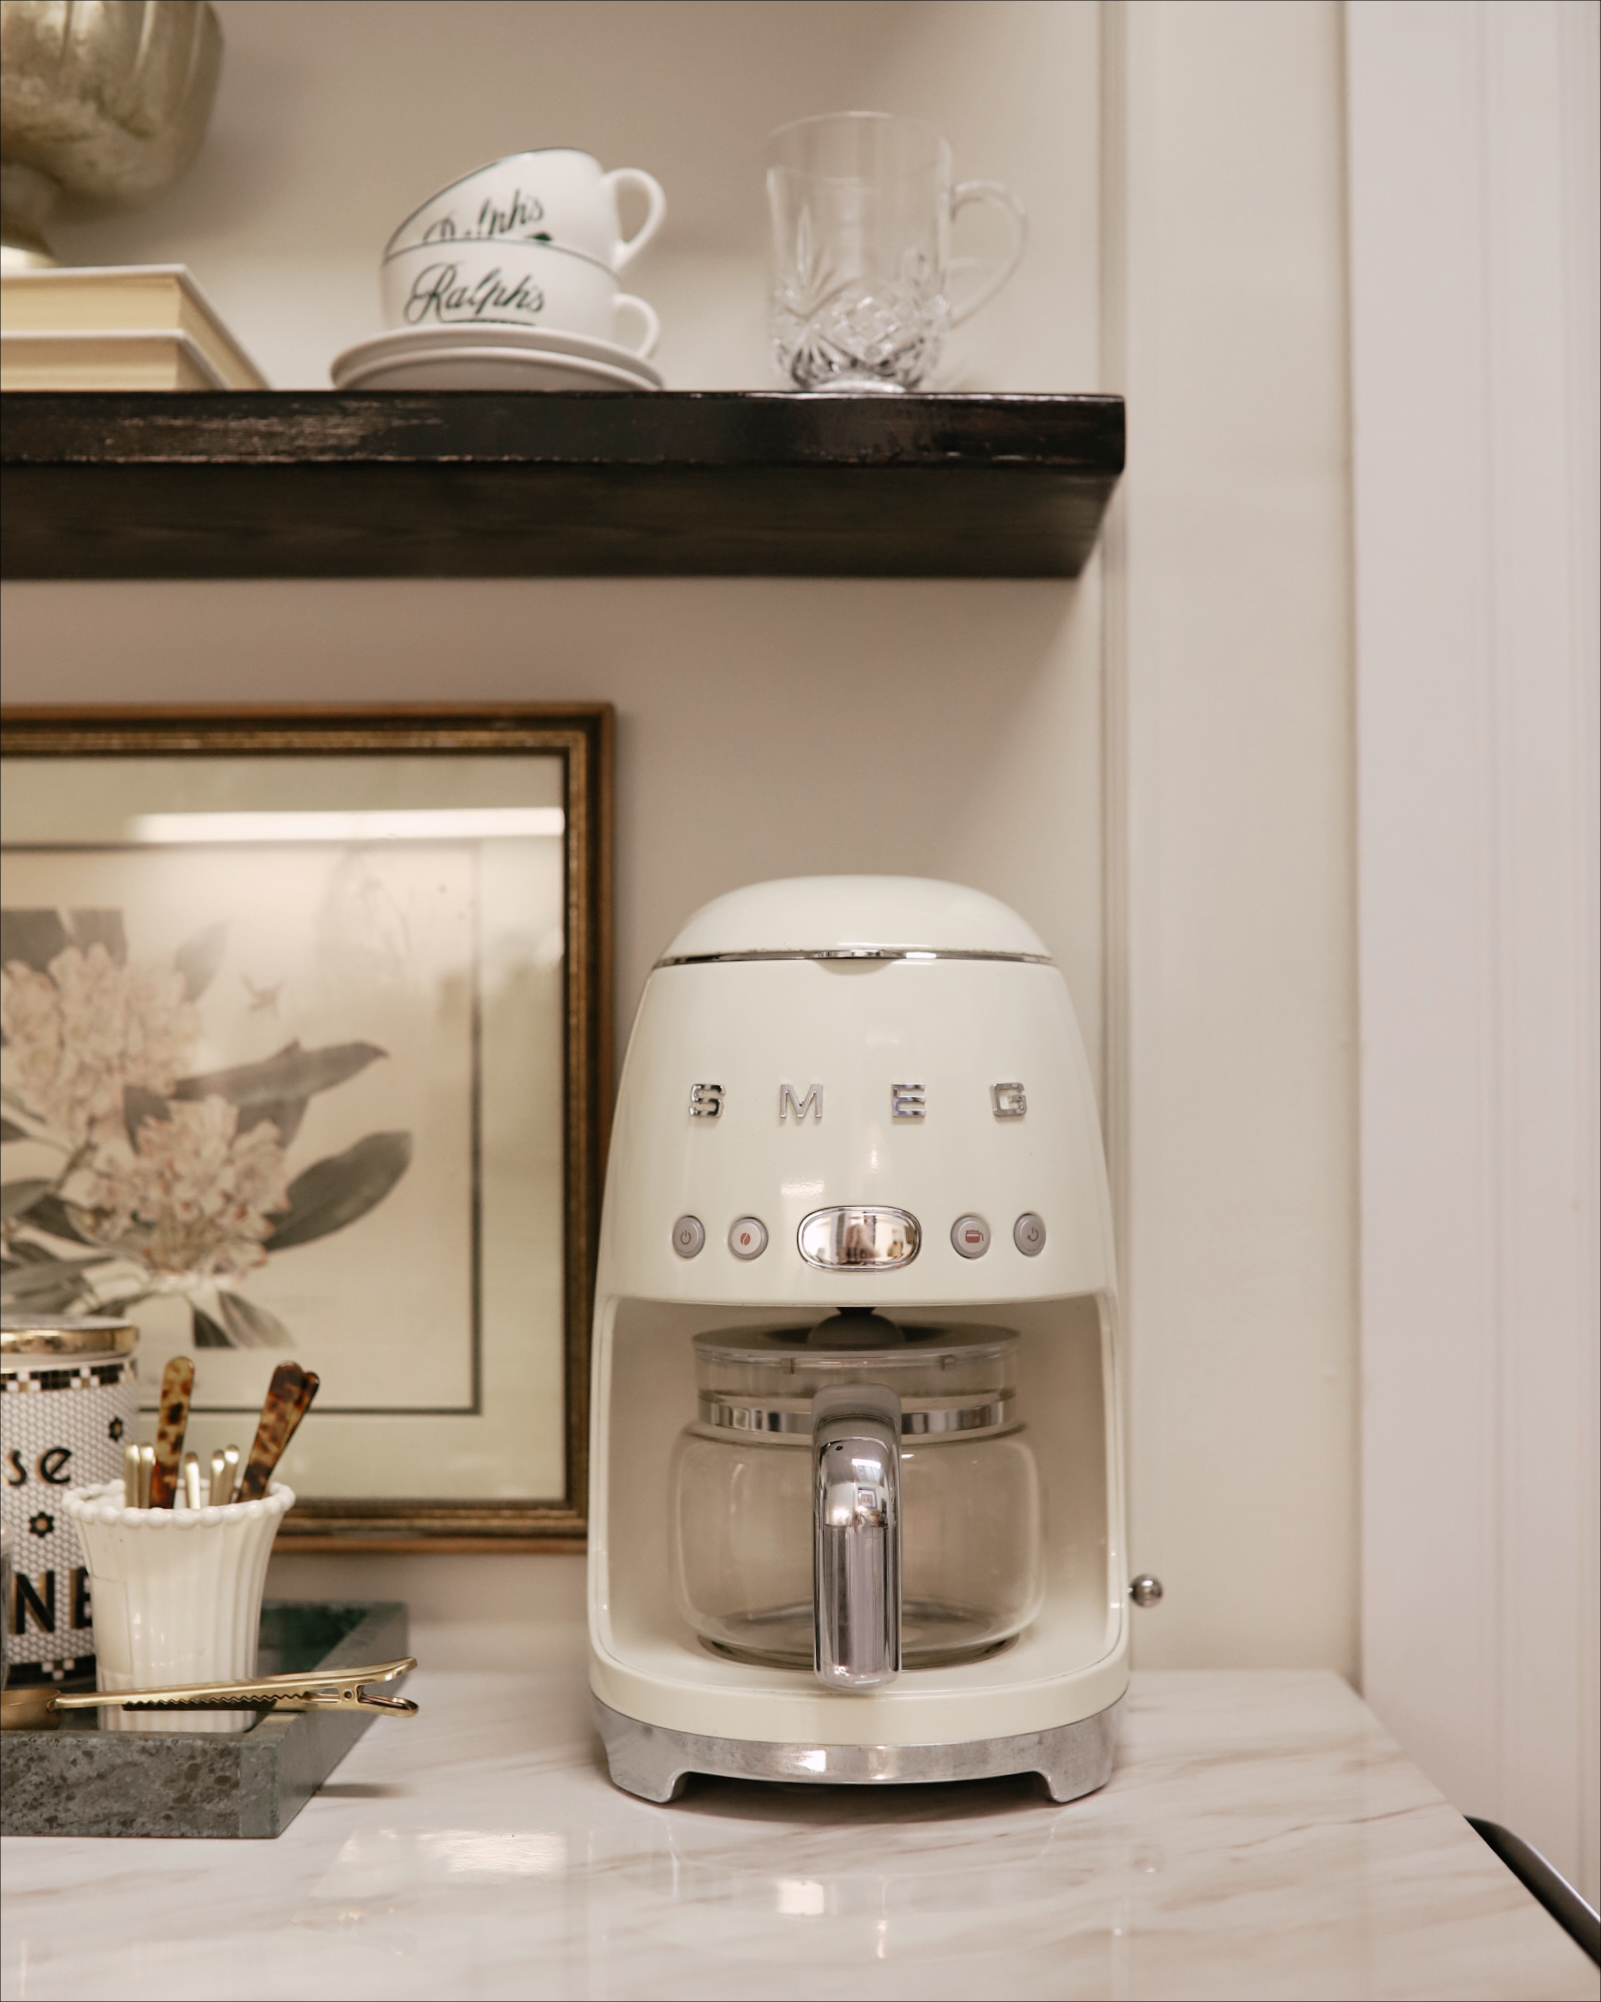 Party Like It's 1959: A Smeg Coffee Maker Review - The Page Edit